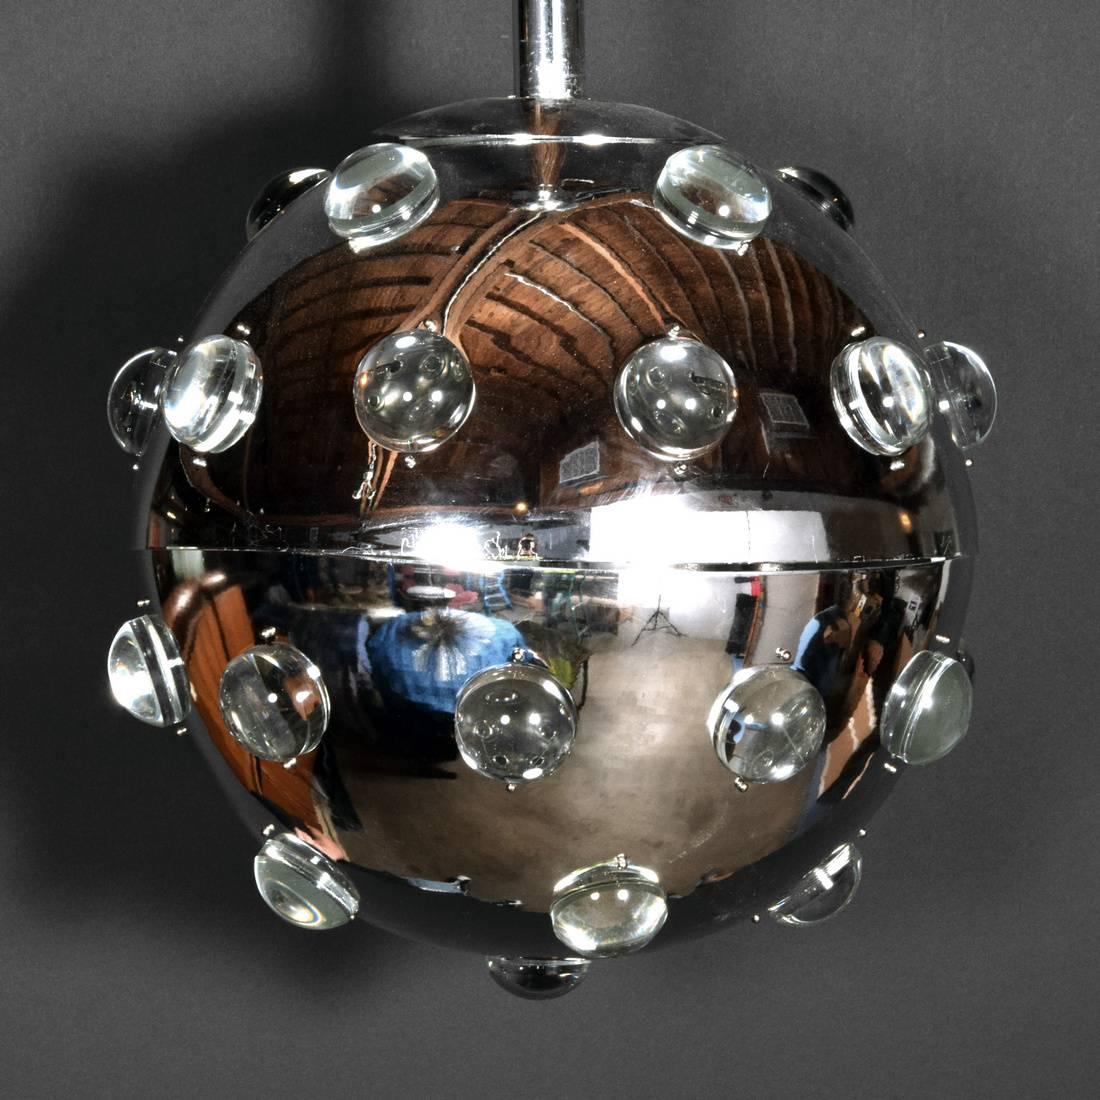 Chandelier height is adjustable and has five-light sockets.

Measures: Shortest 52" and longest 64".